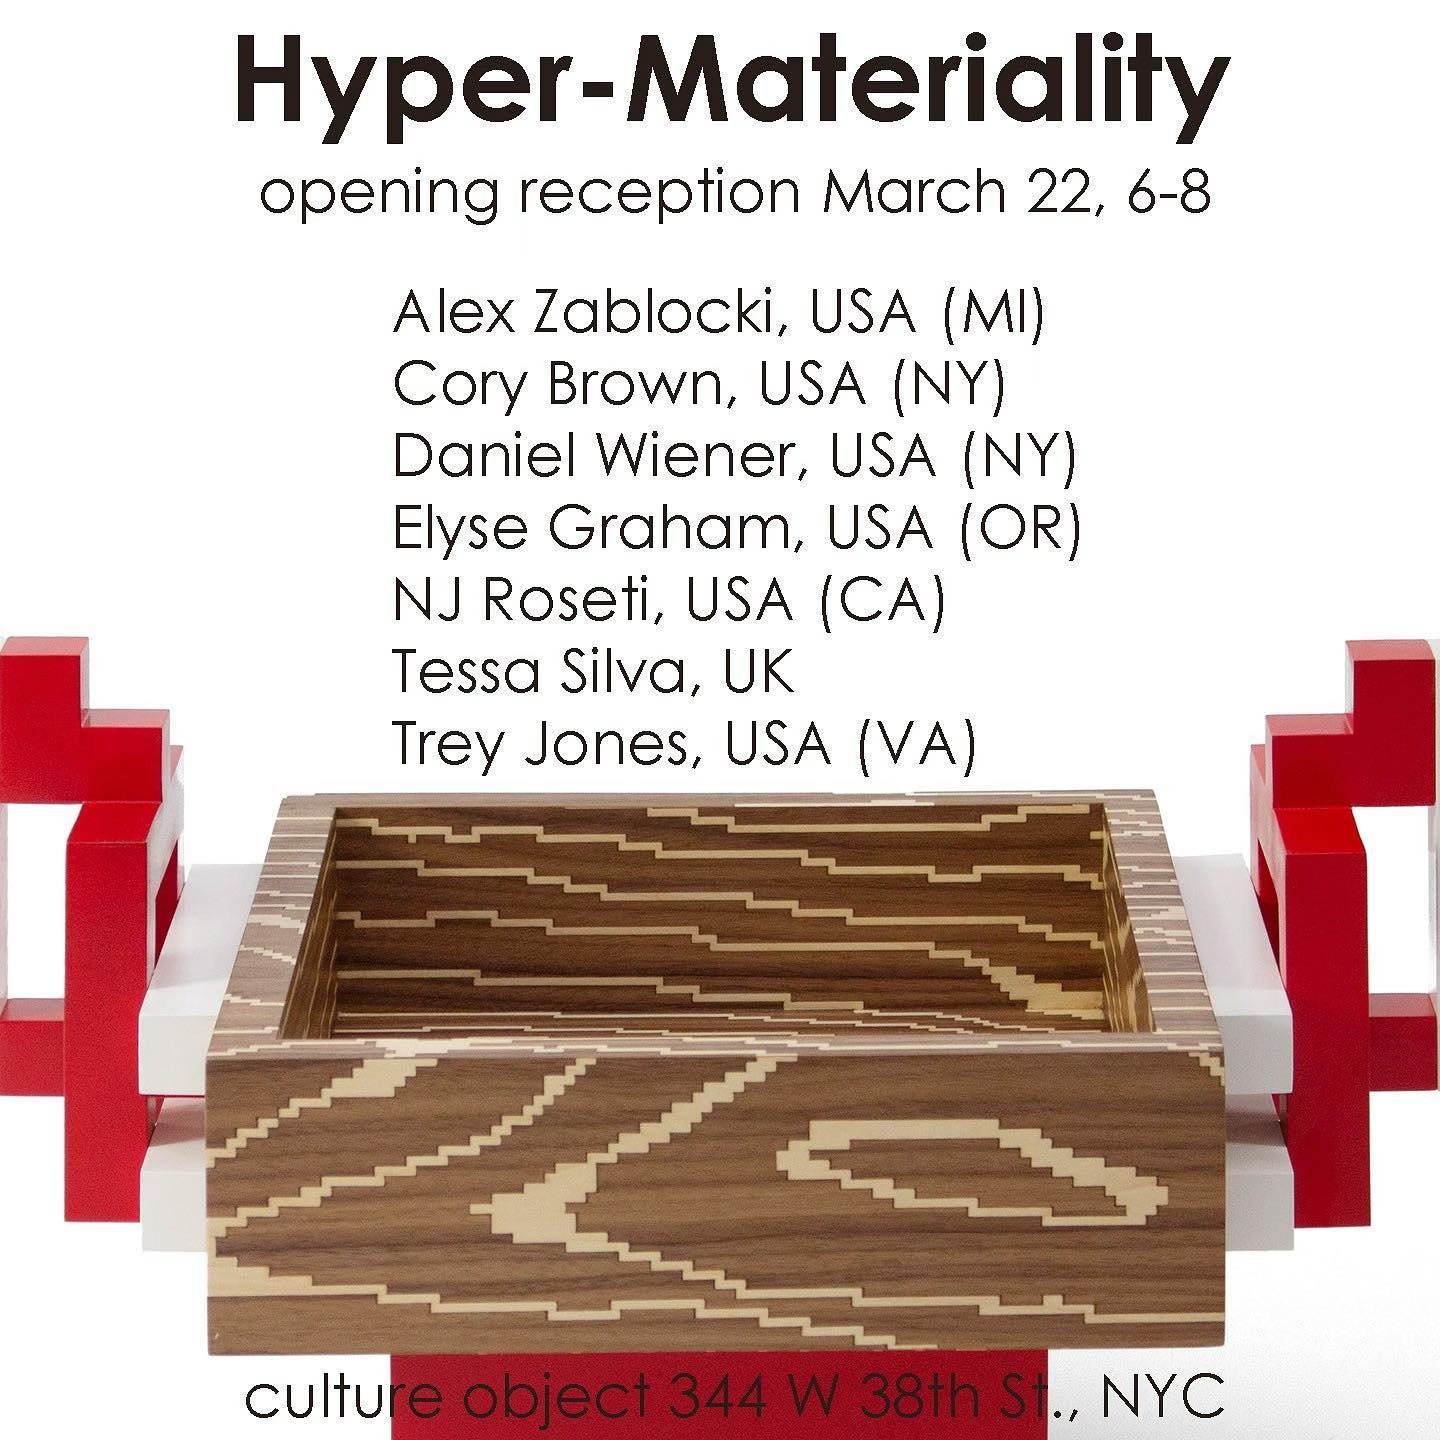 Opening Tonight : Hyper-Materiality 
@culture.object 

Please join us tonight to celebrate the opening of a group exhibition exploring artistic practices that focus on the skillful manipulation of unusual materials with innovative processes.

Exhibit